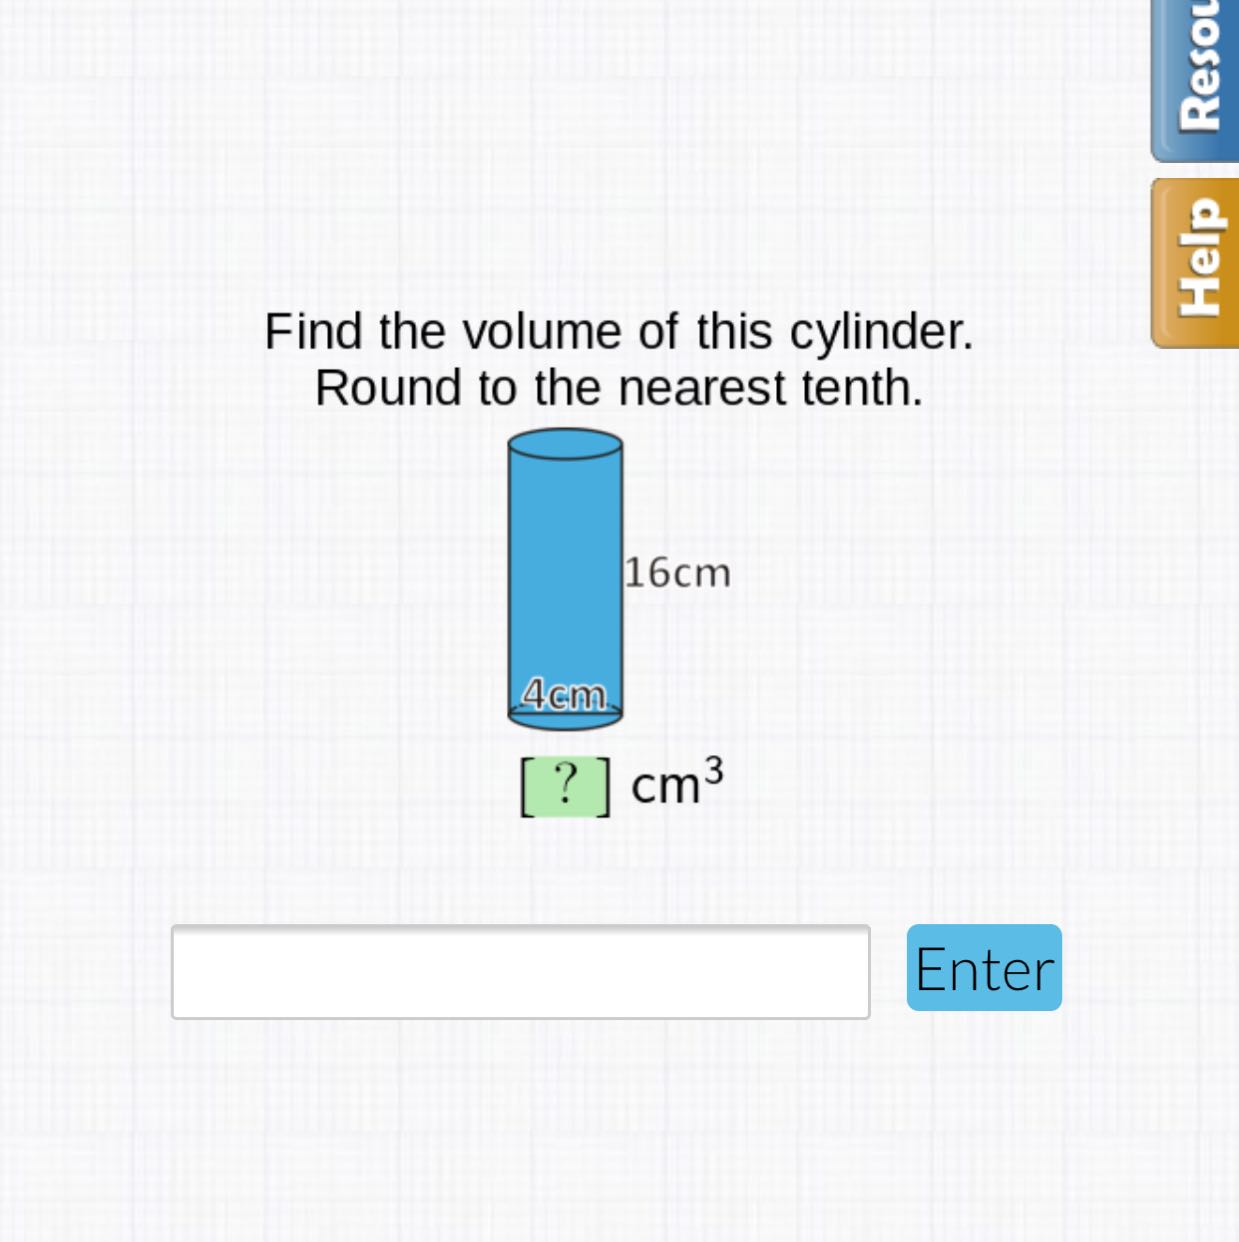 Find the volume of this cylinder. Round to the nearest tenth.
Enter